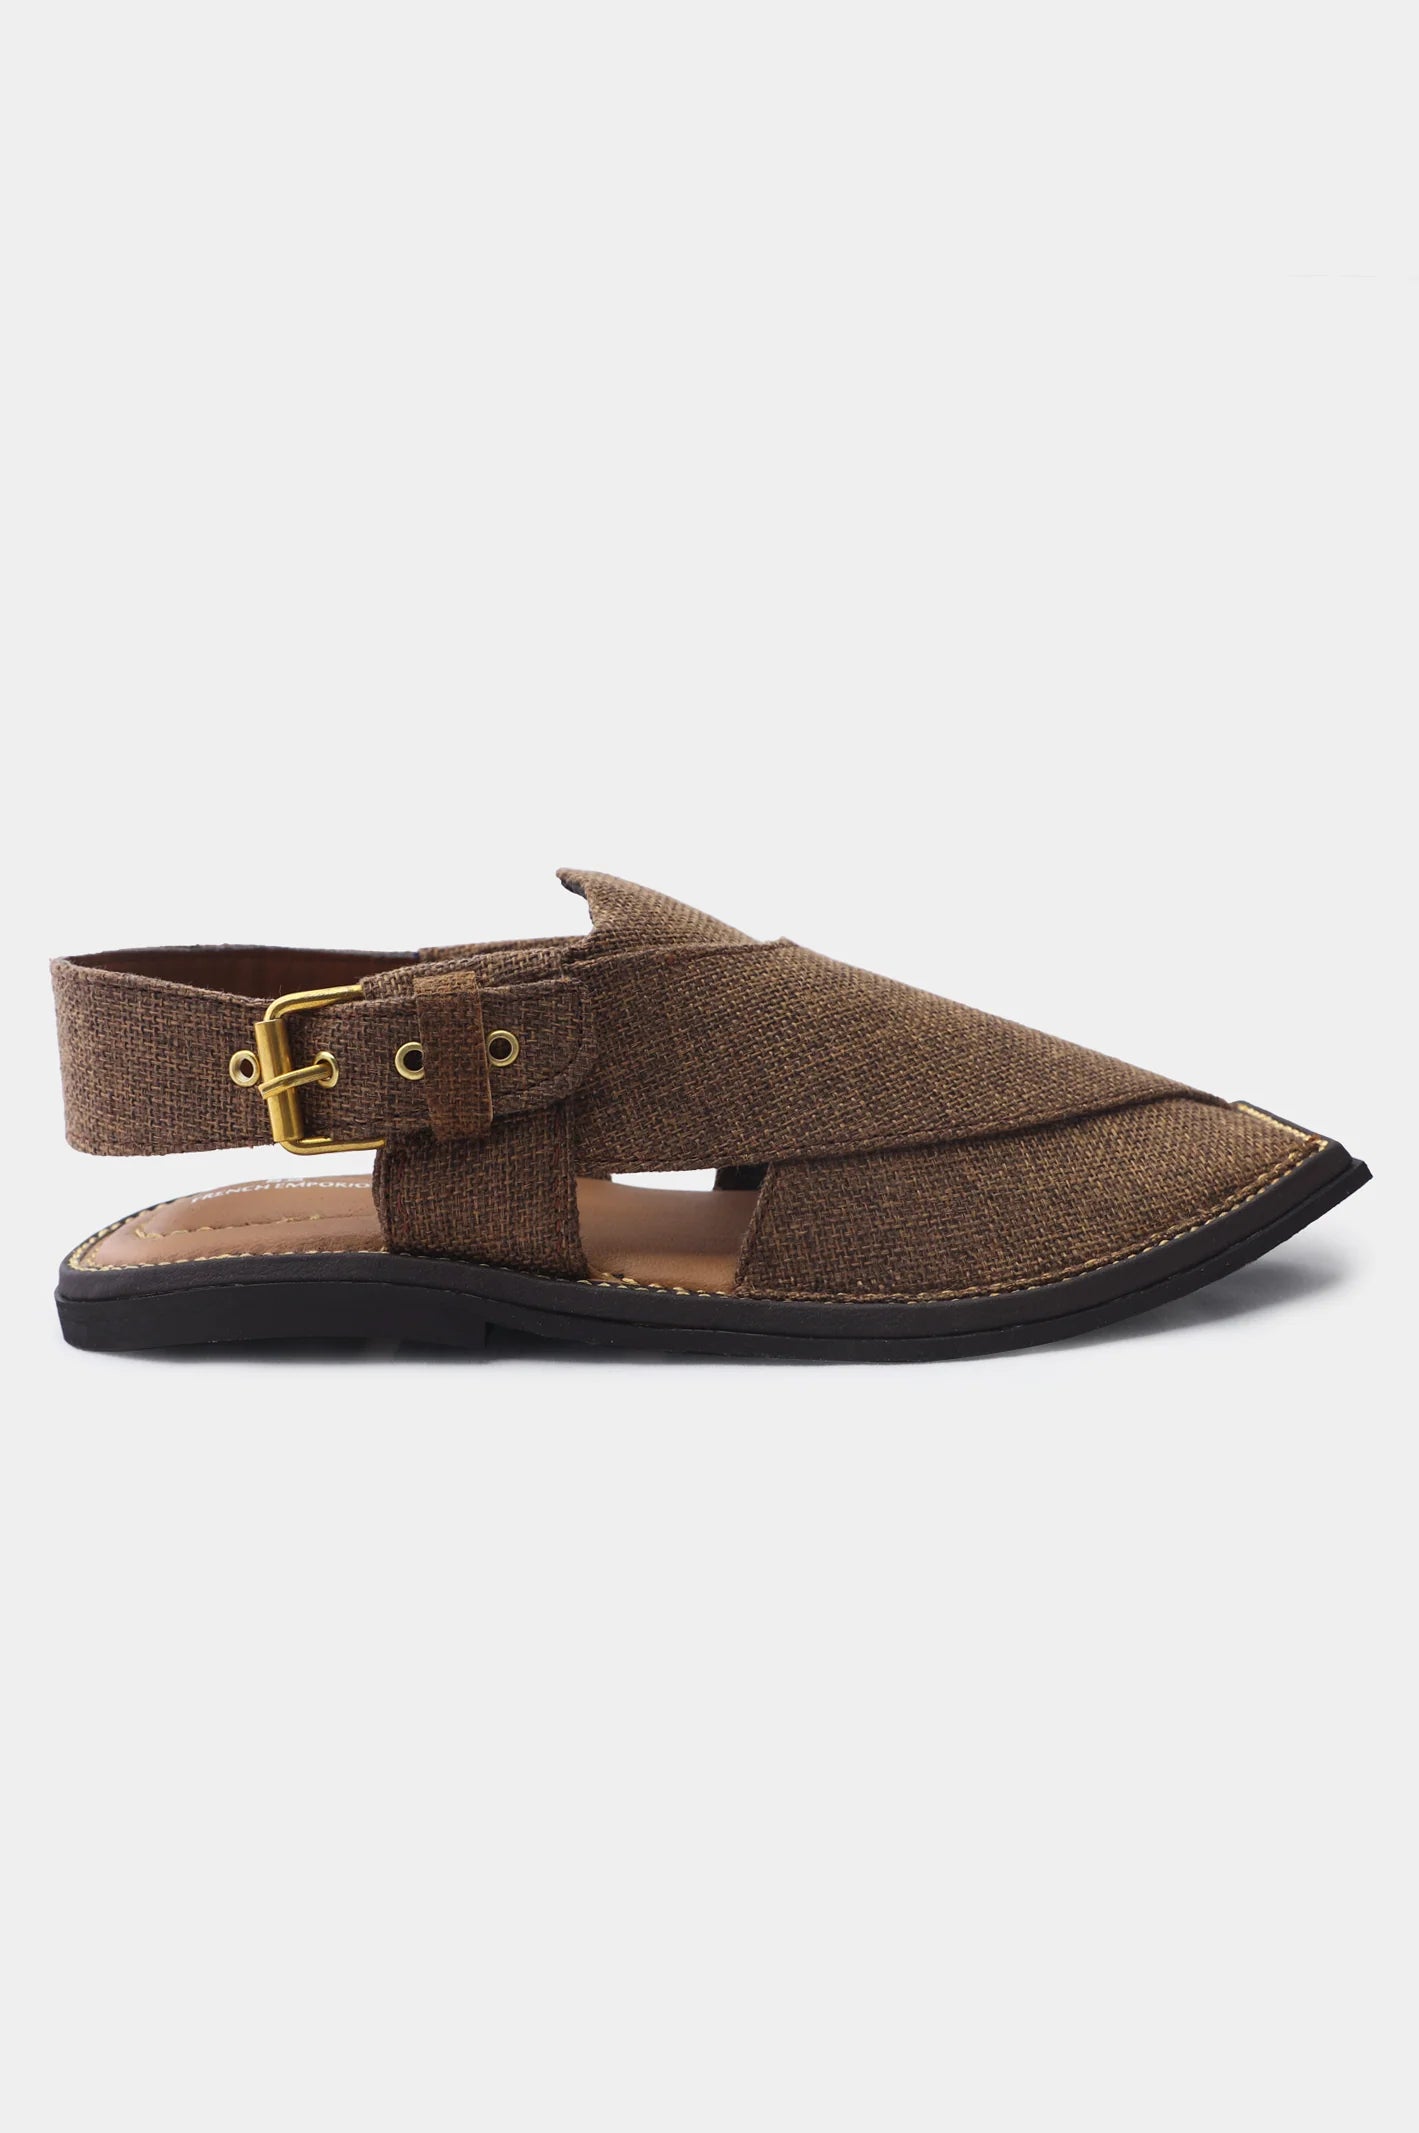 French Emporio Men's Sandals From French Emporio By Diners